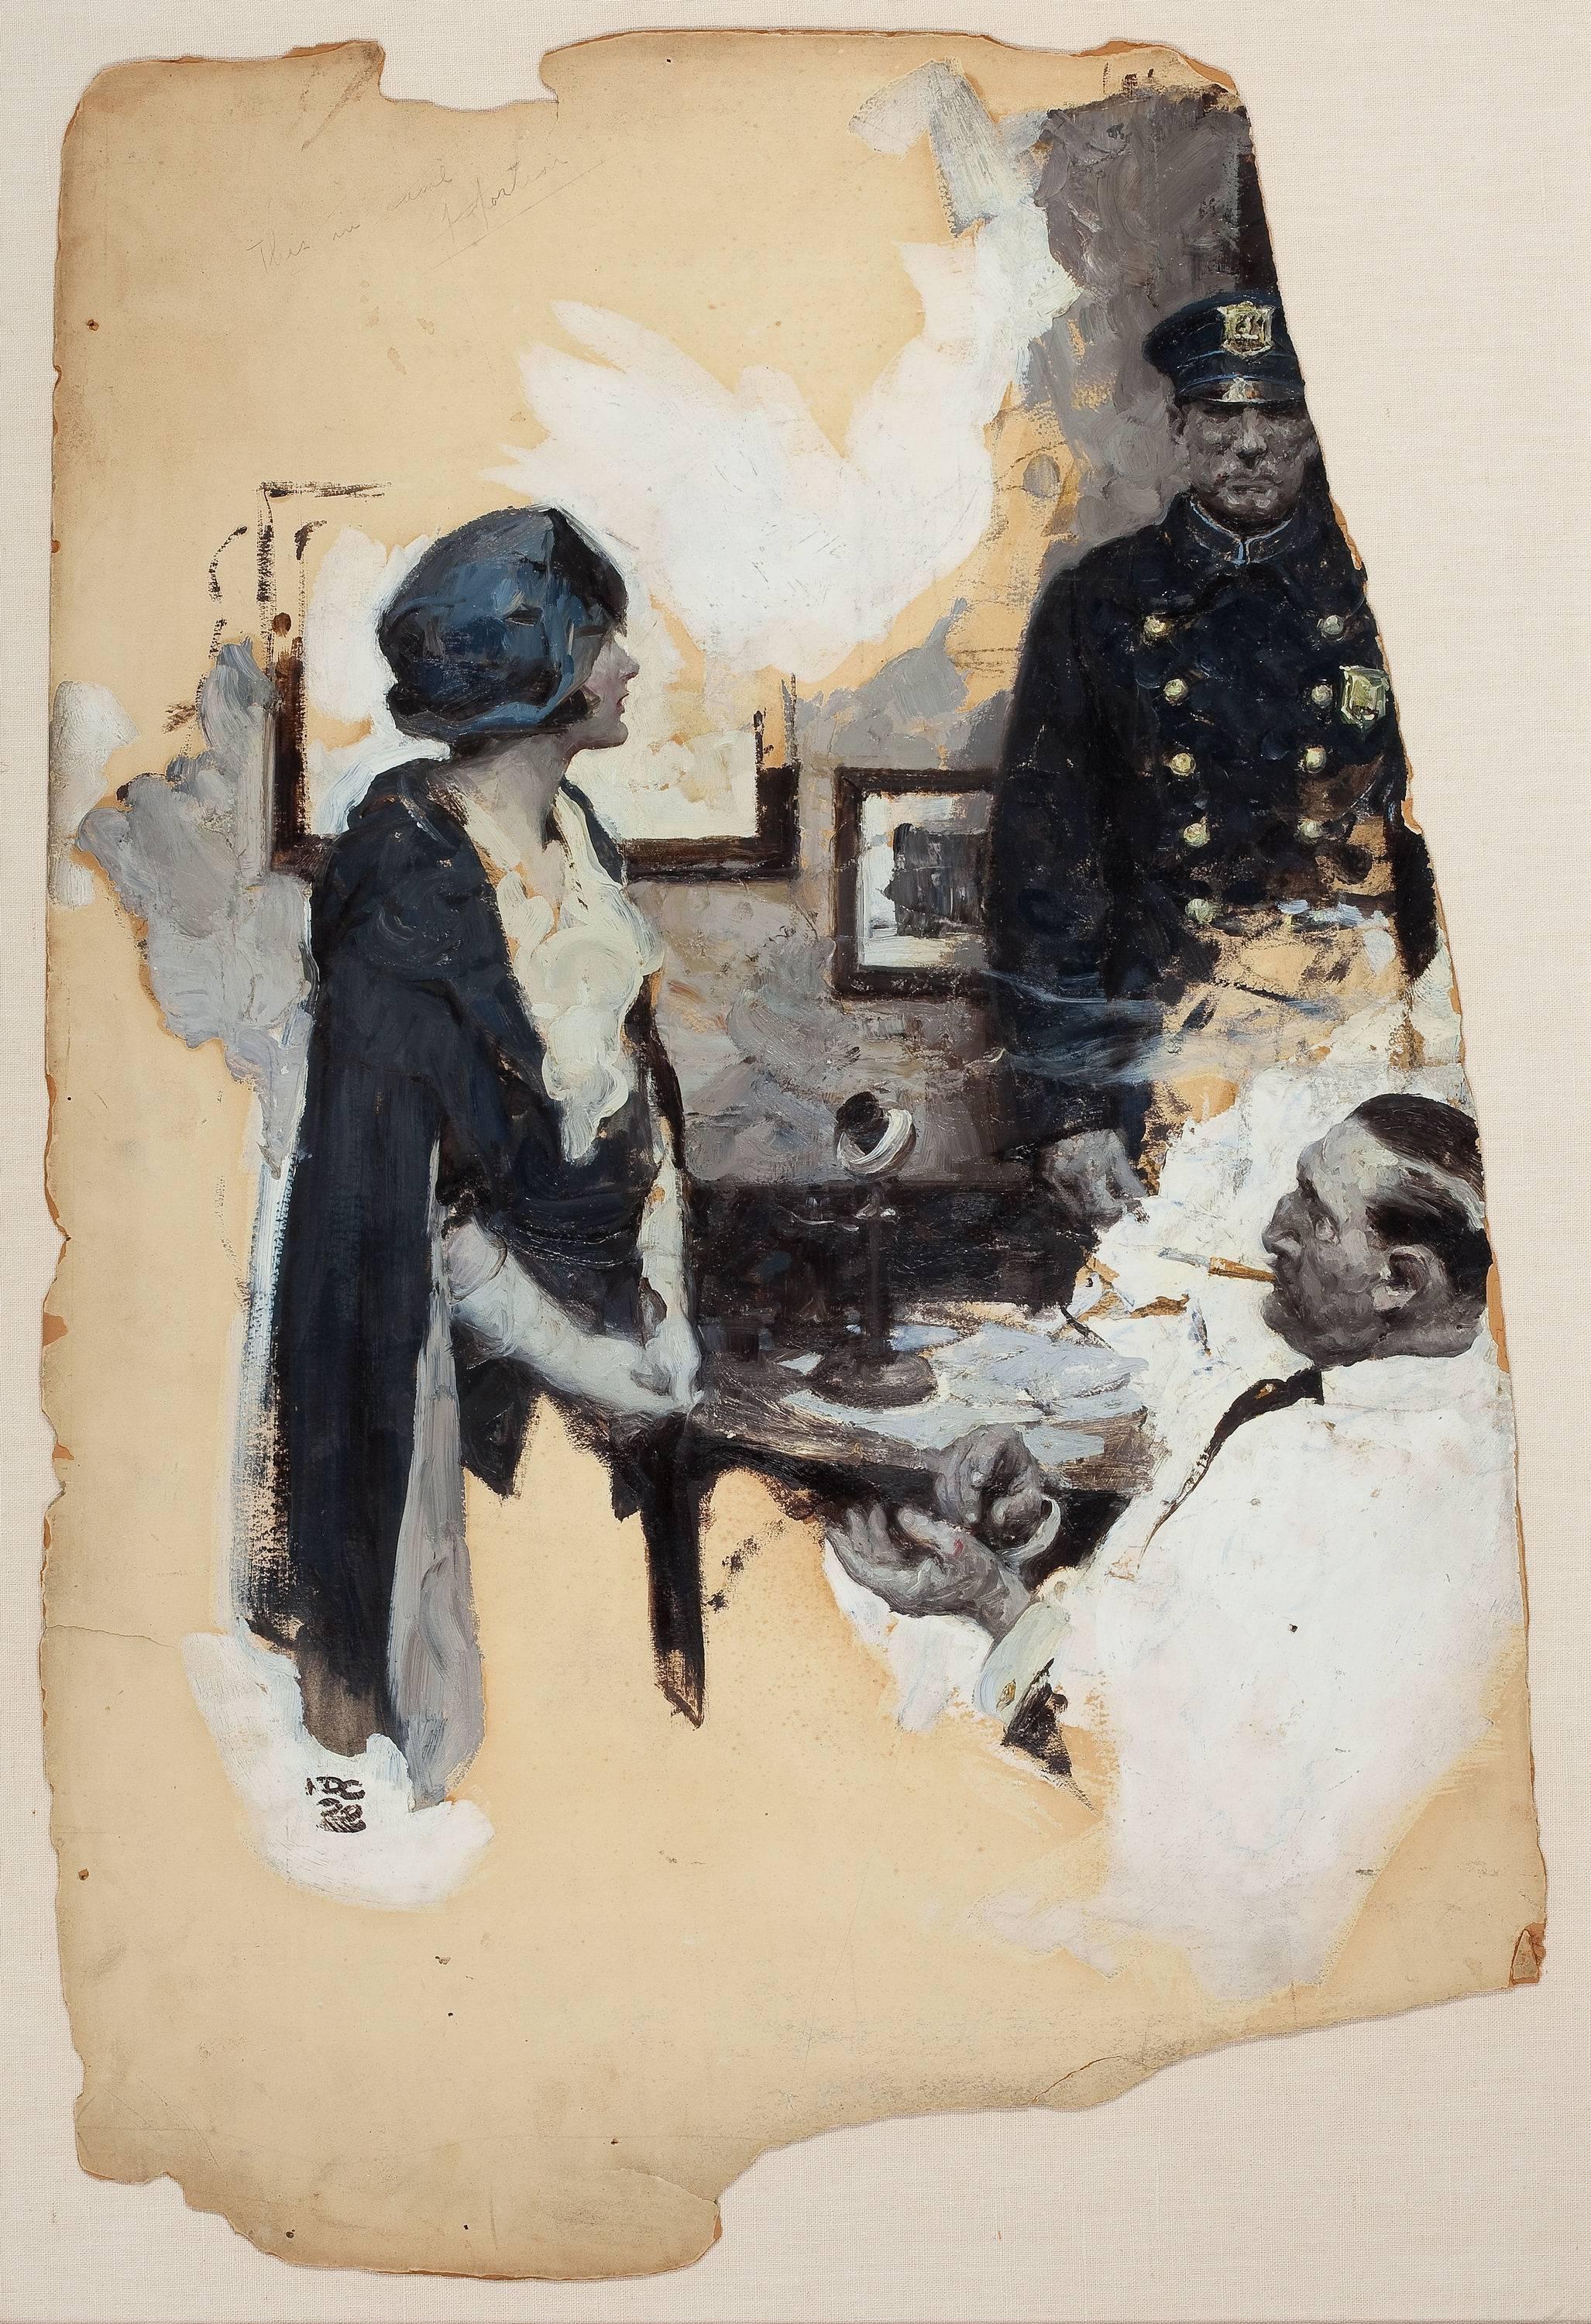 Dean Cornwell Figurative Painting - At the Precinct, Story Illustration